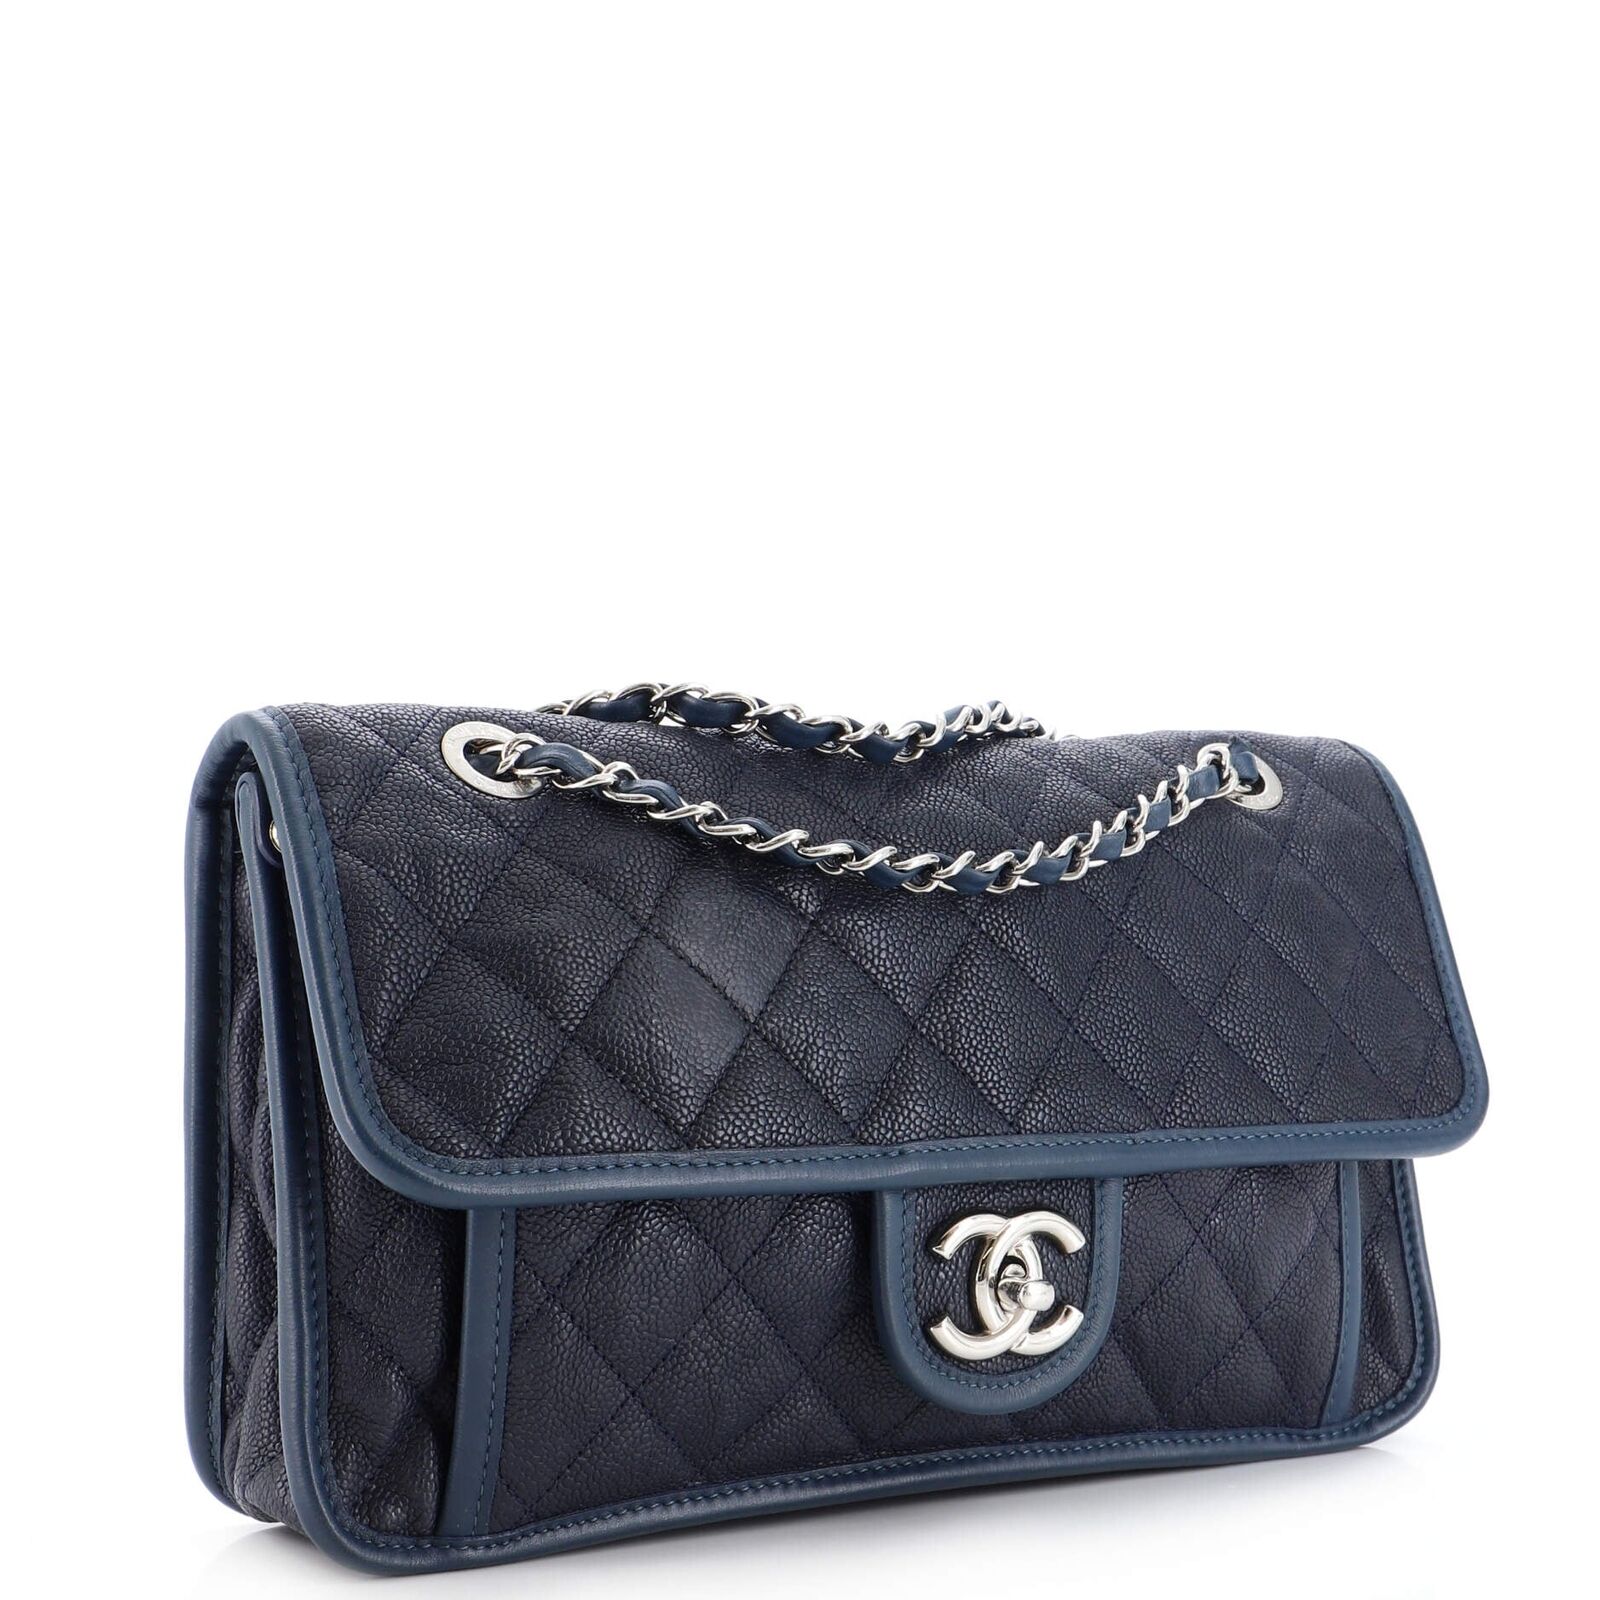 CHANEL French Riviera (See more at